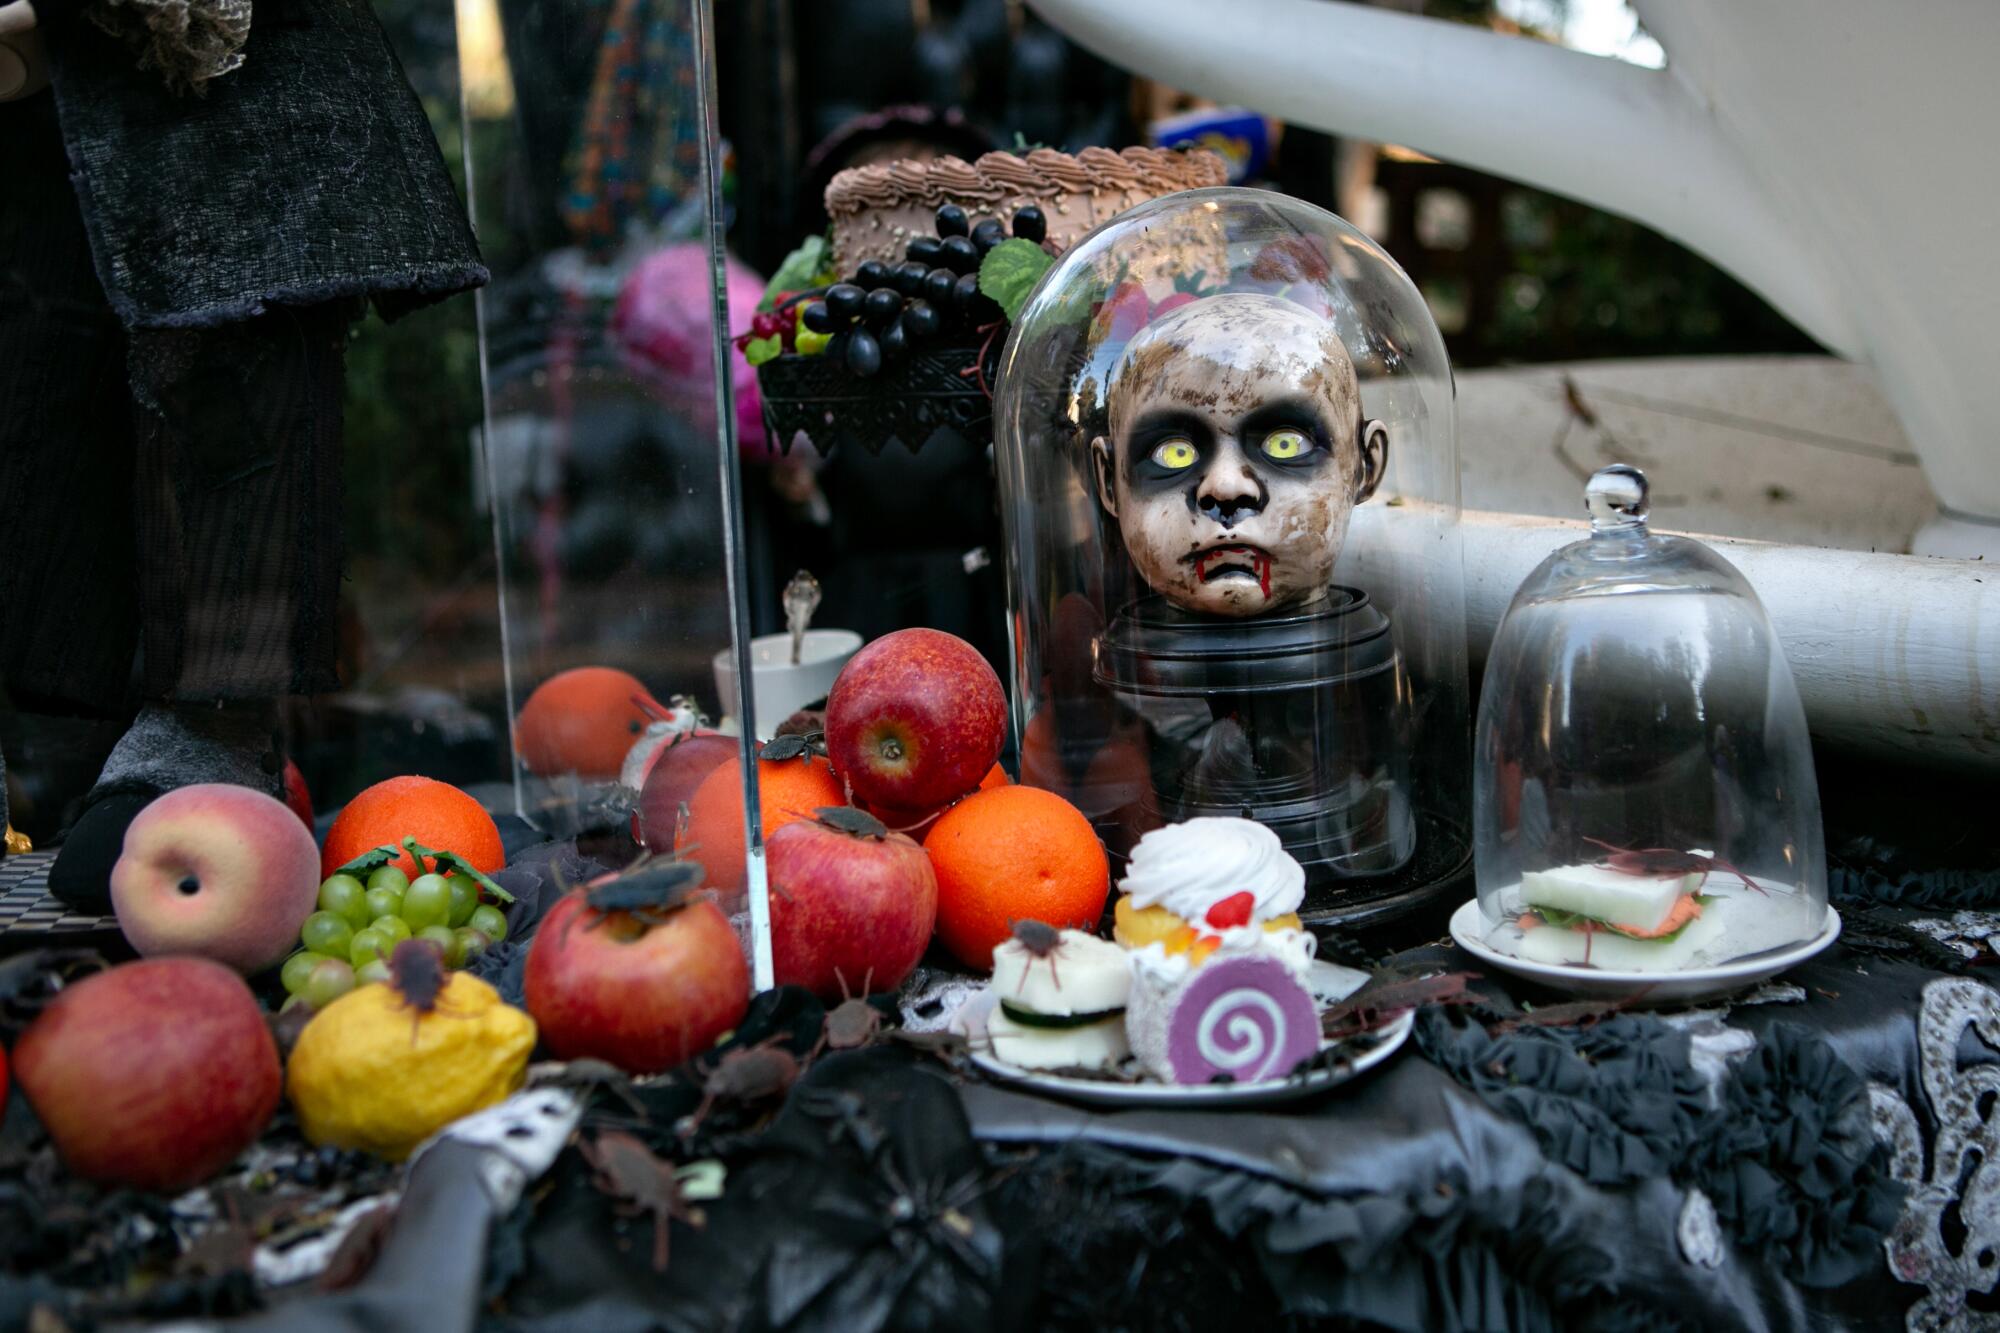 The Brentwood home features a scary "Alice in Wonderland" scene.